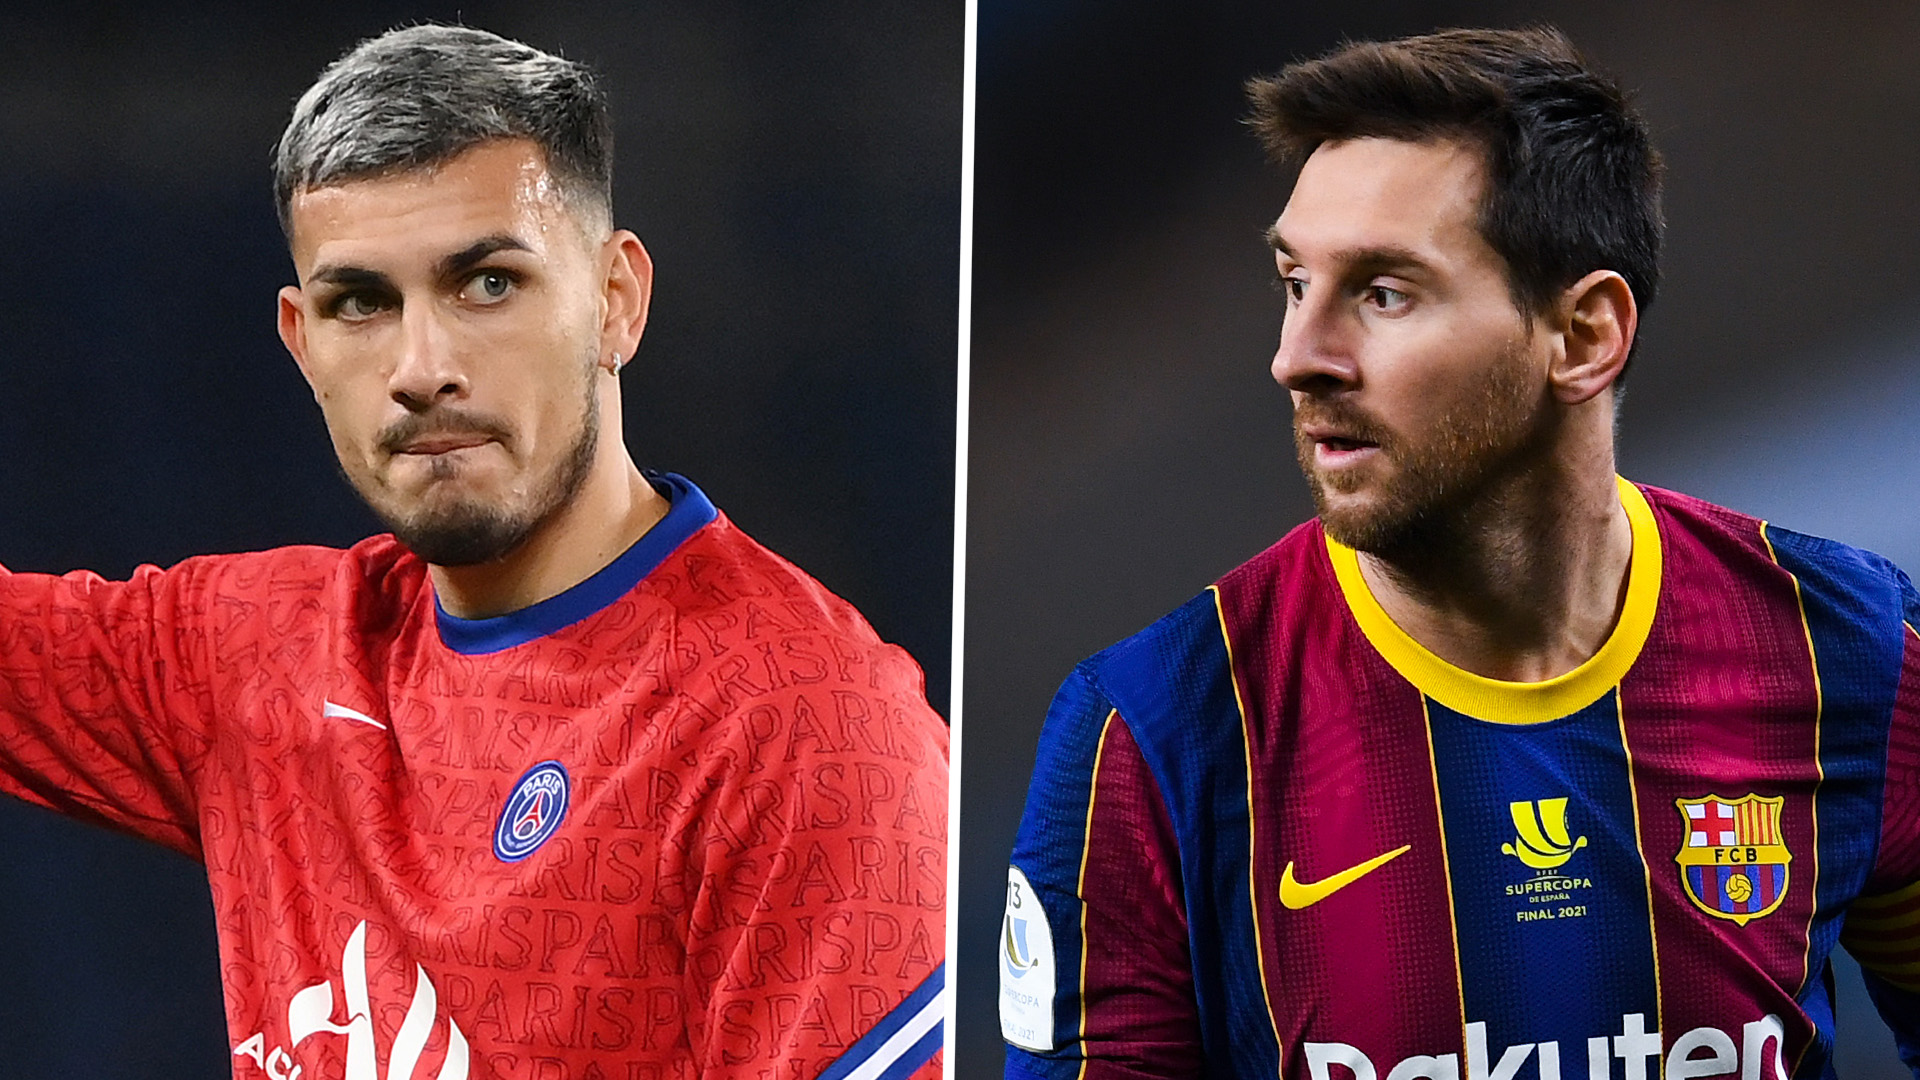 Paredes Urges Messi To Make Psg Move Denies He Ll Leave Despite